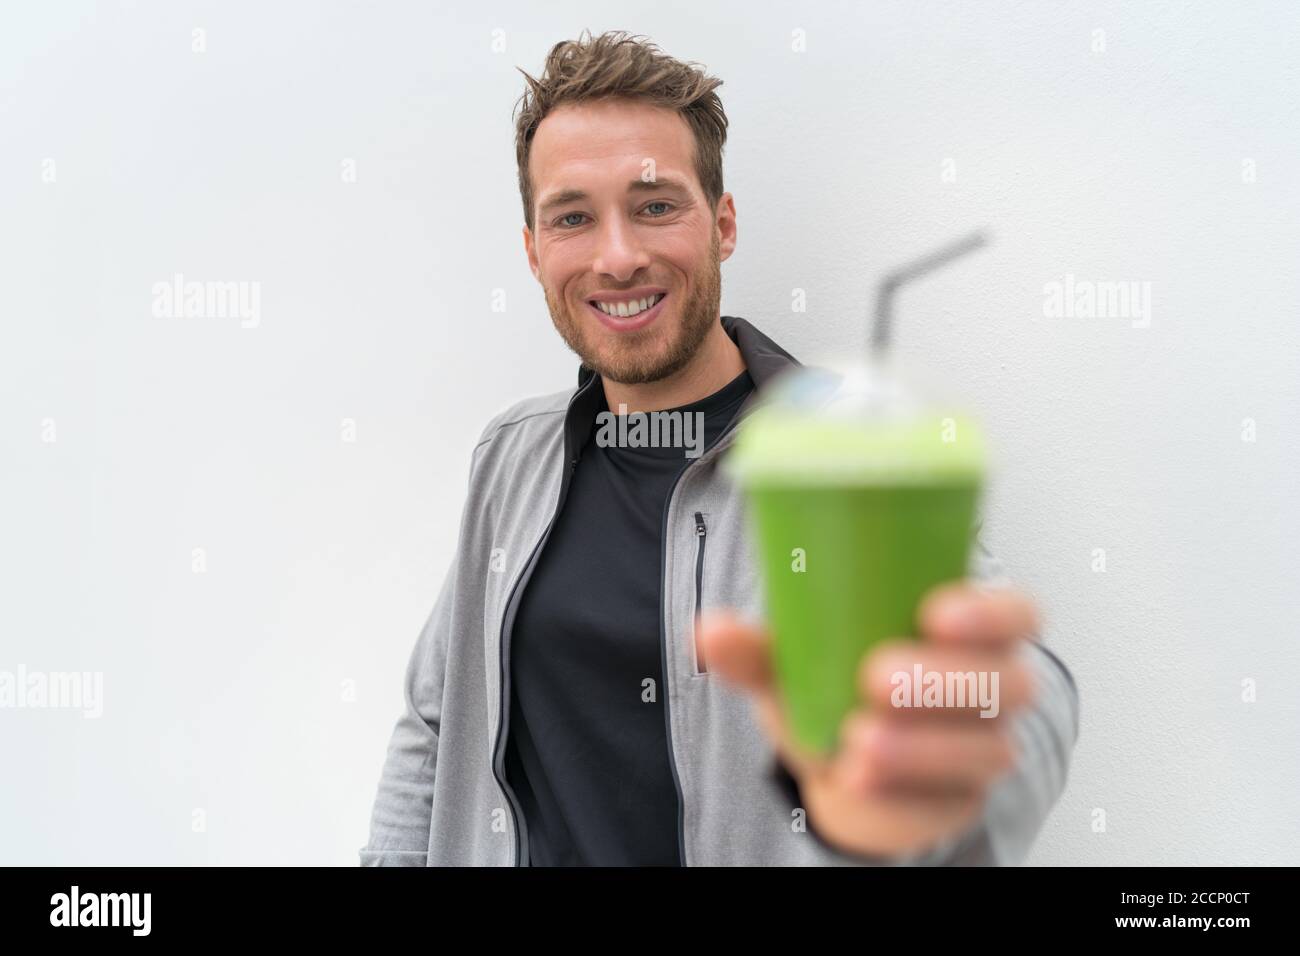 Health man drinking weight loss green smoothie. Healthy fit man happy drinking detox cleanse vegetable juice. Active lifestyle, morning breakfast Stock Photo